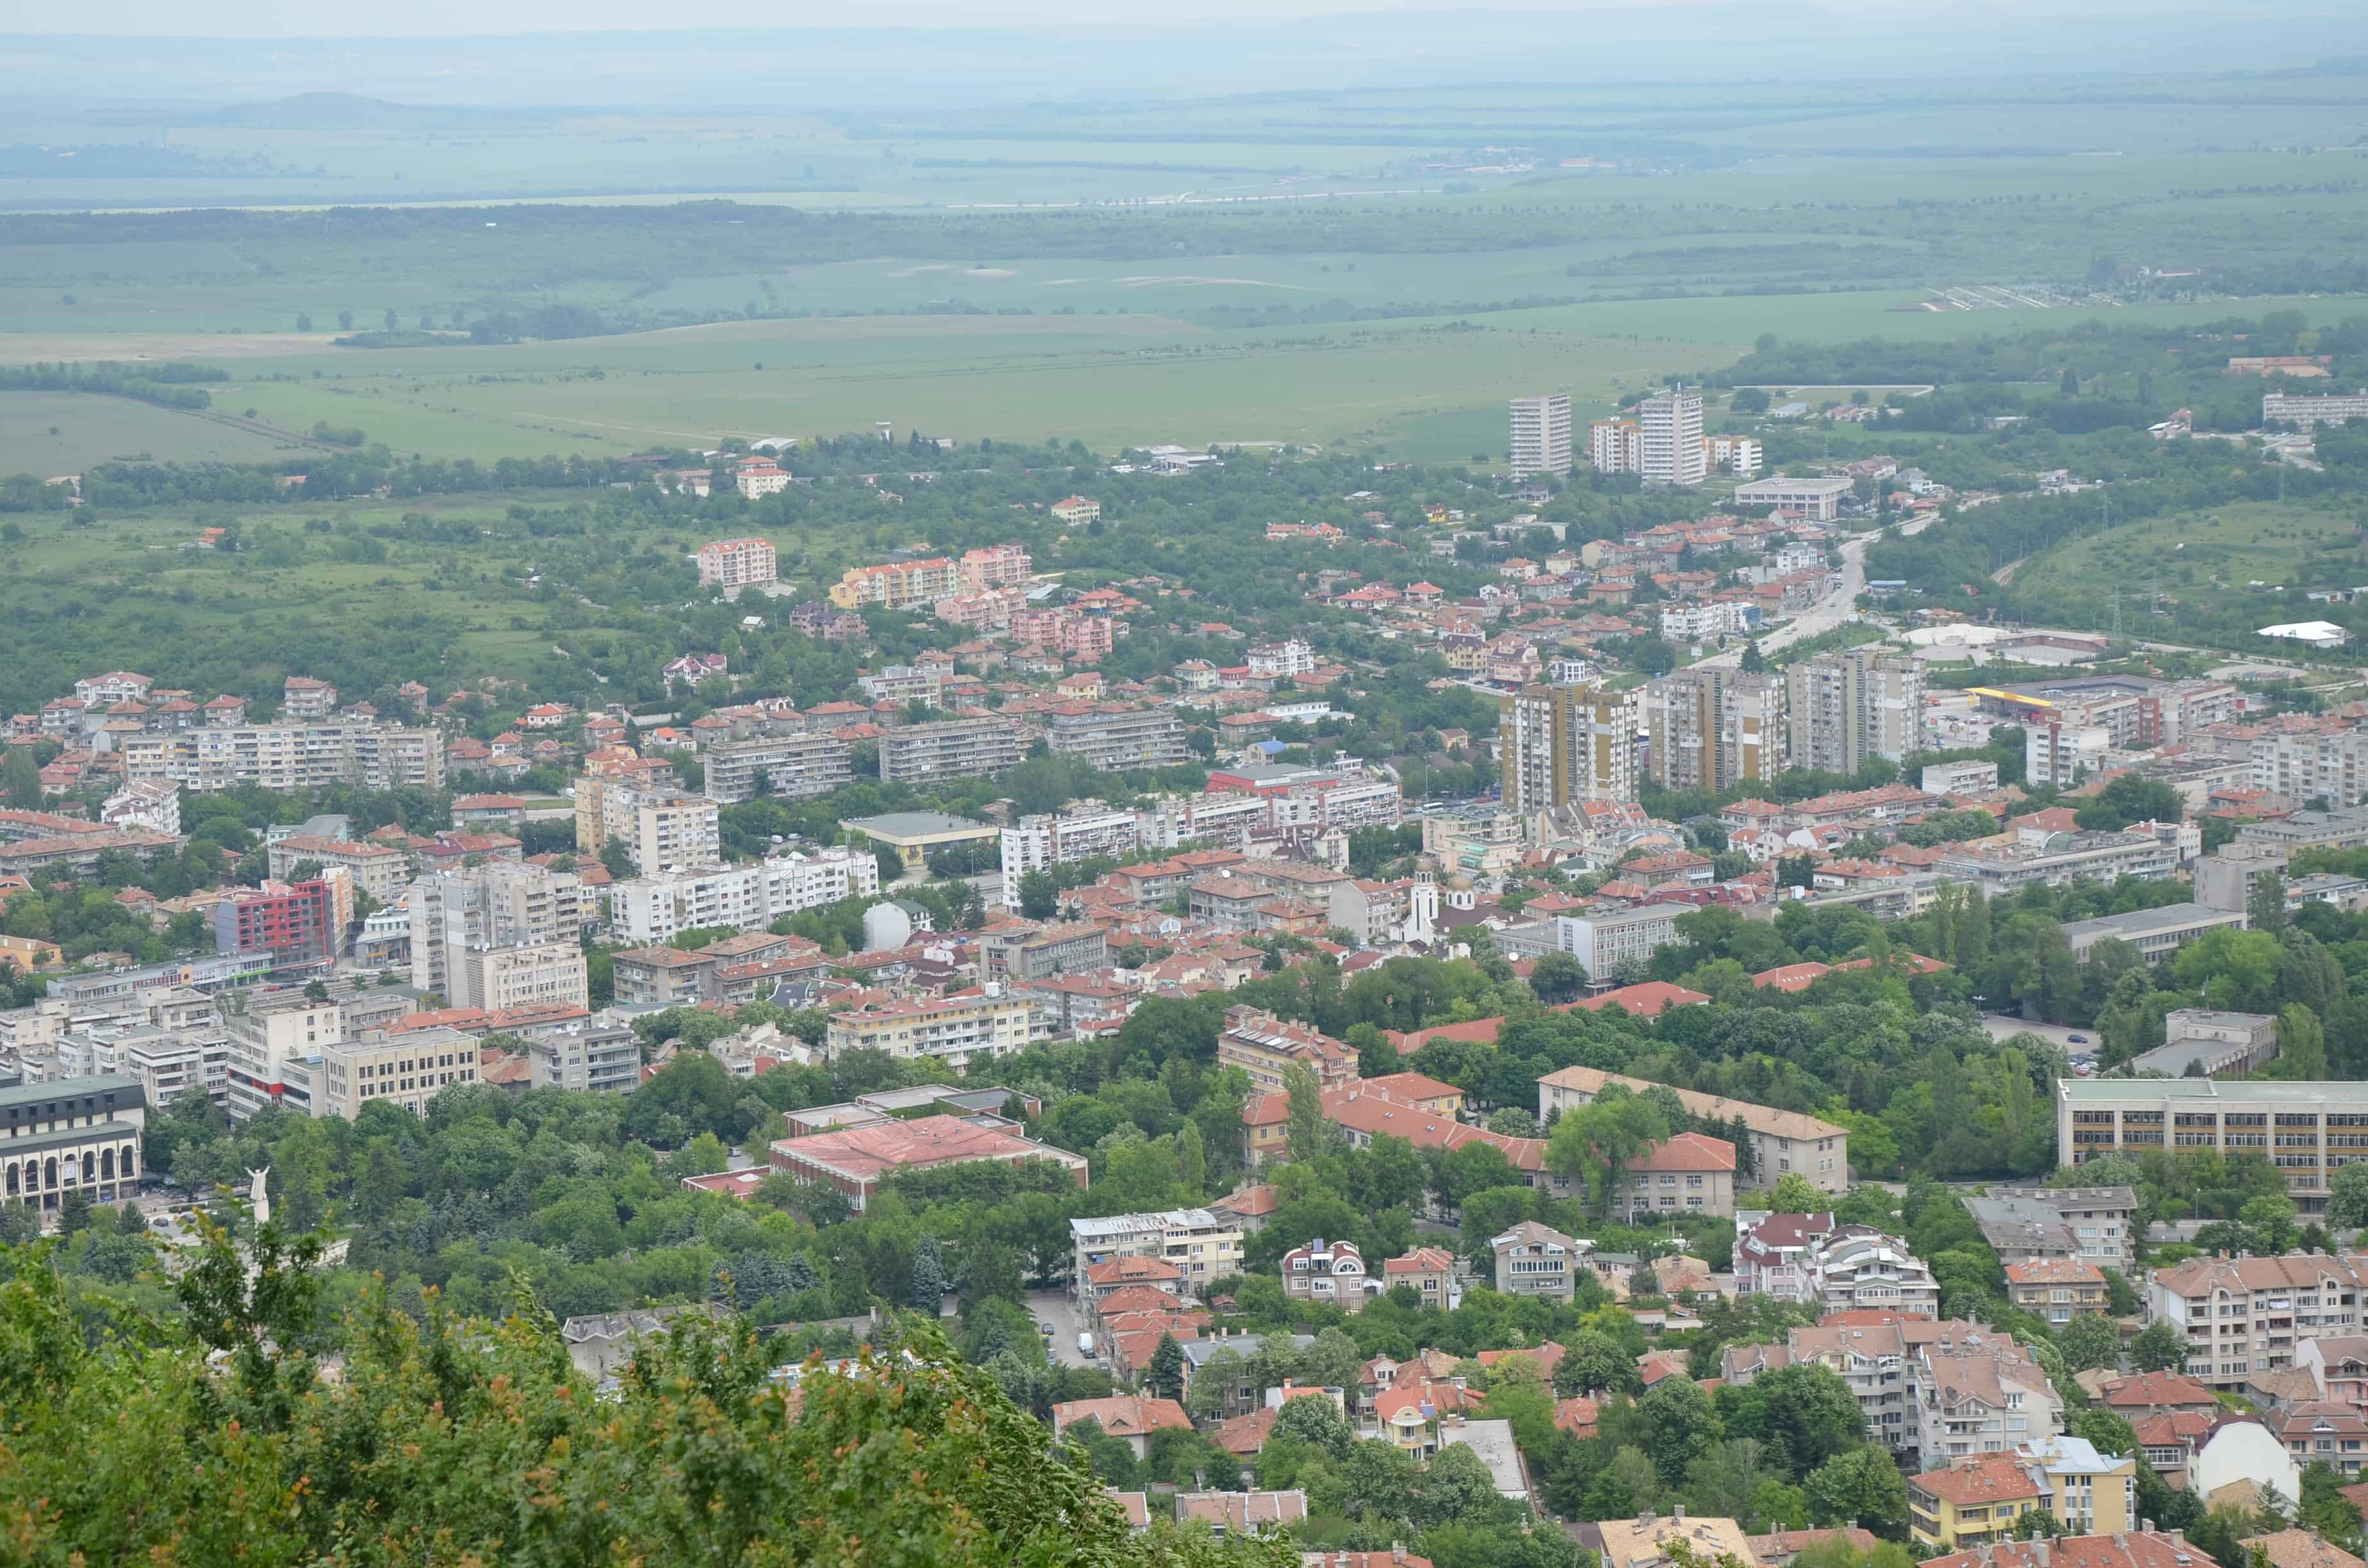 View of Shumen from the Founders of the Bulgarian State Monument in Shumen, Bulgaria